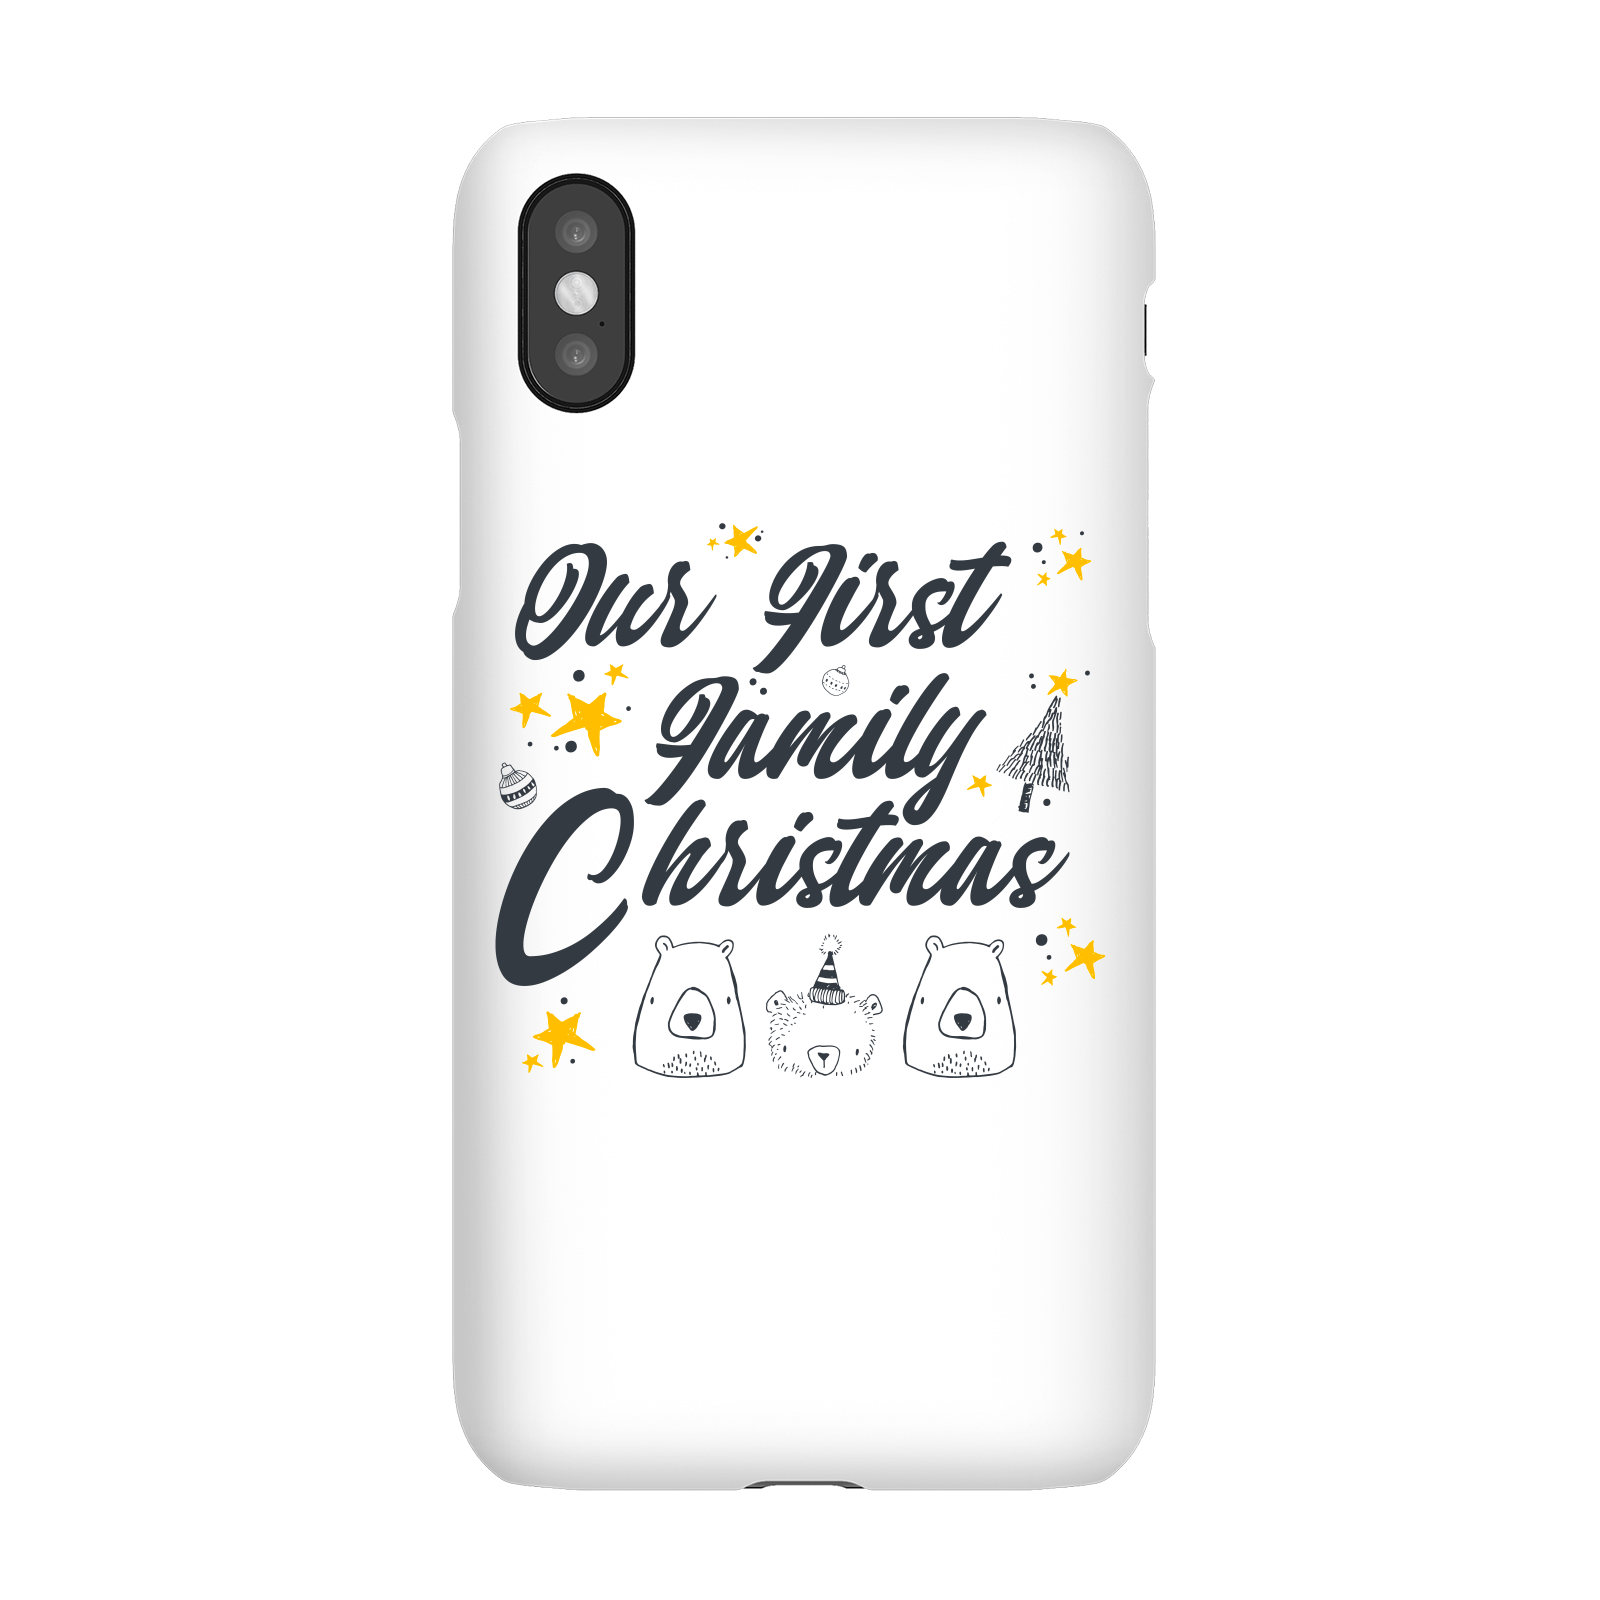 First Family Christmas Phone Case for iPhone and Android - iPhone 5/5s - Snap Case - Matte